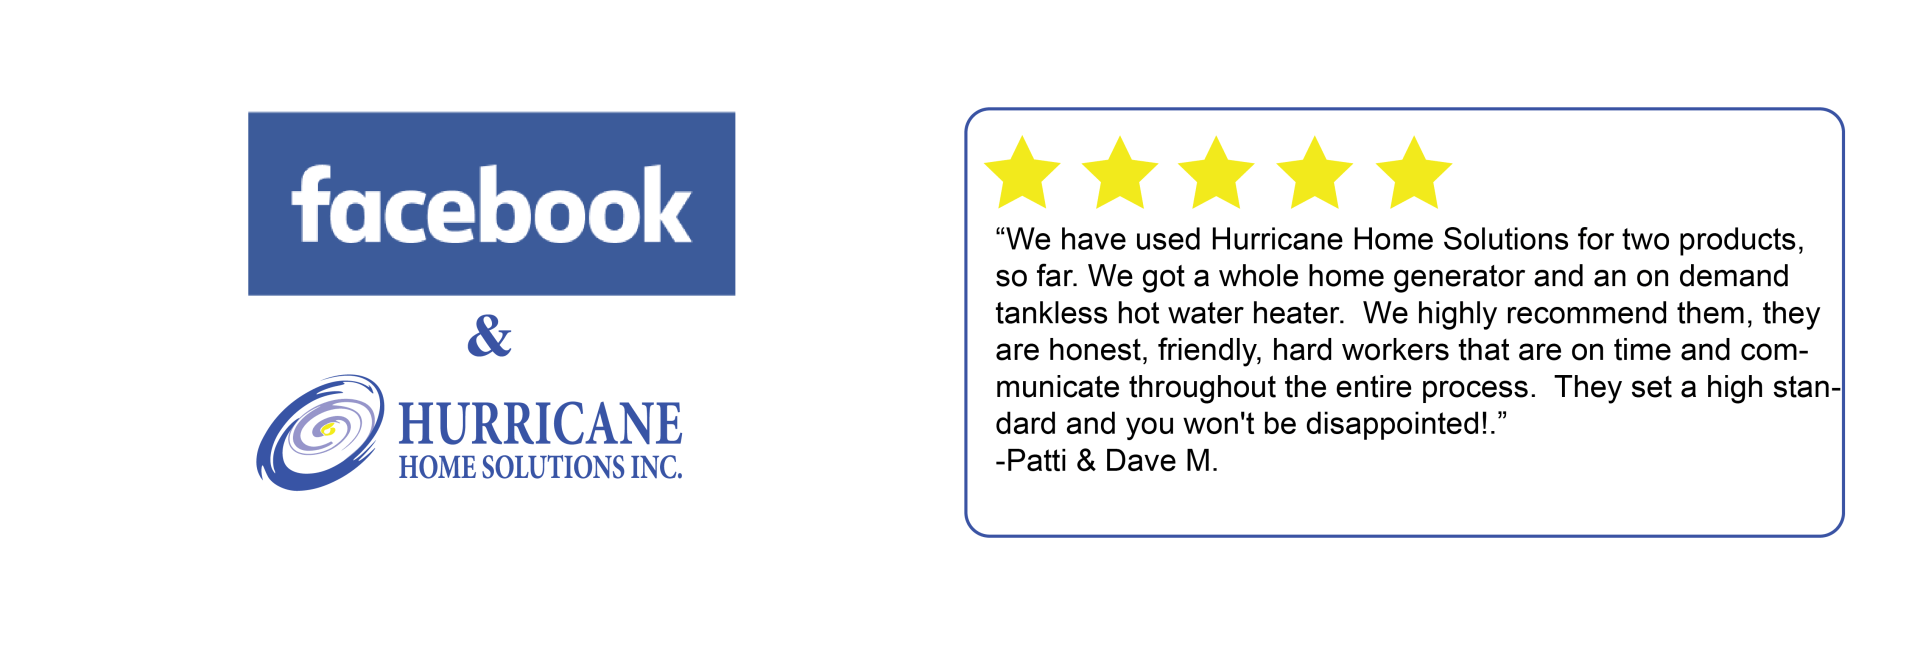 A 5-Star Review on Facebook for Hurricane Home Solutions